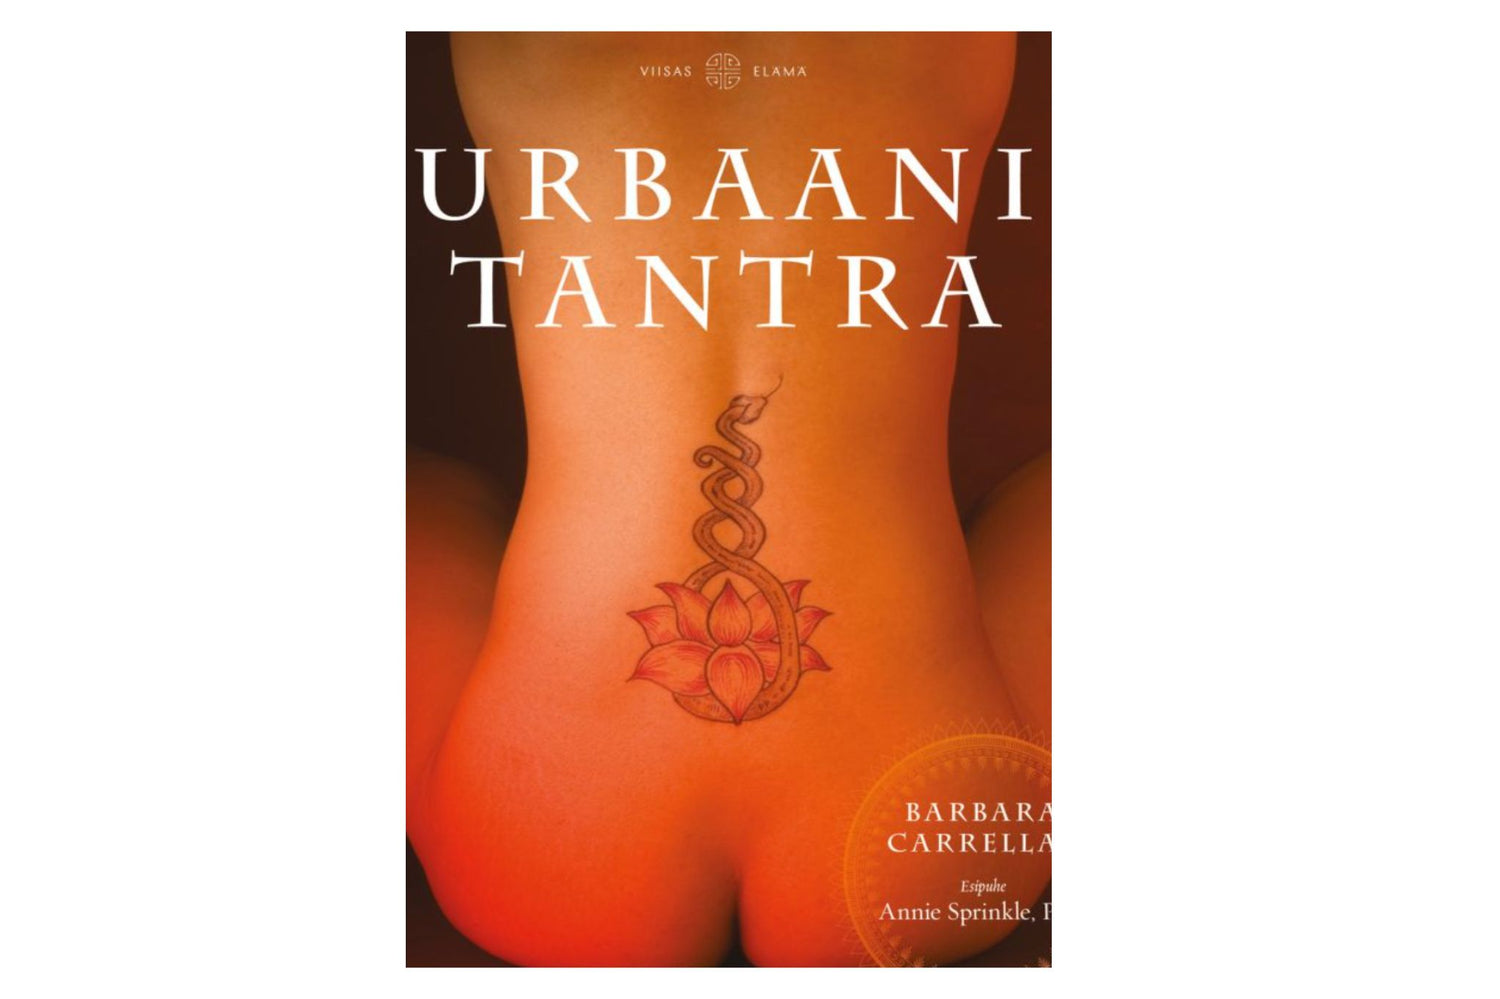 Urban tantra-sacred sex in the 21st century